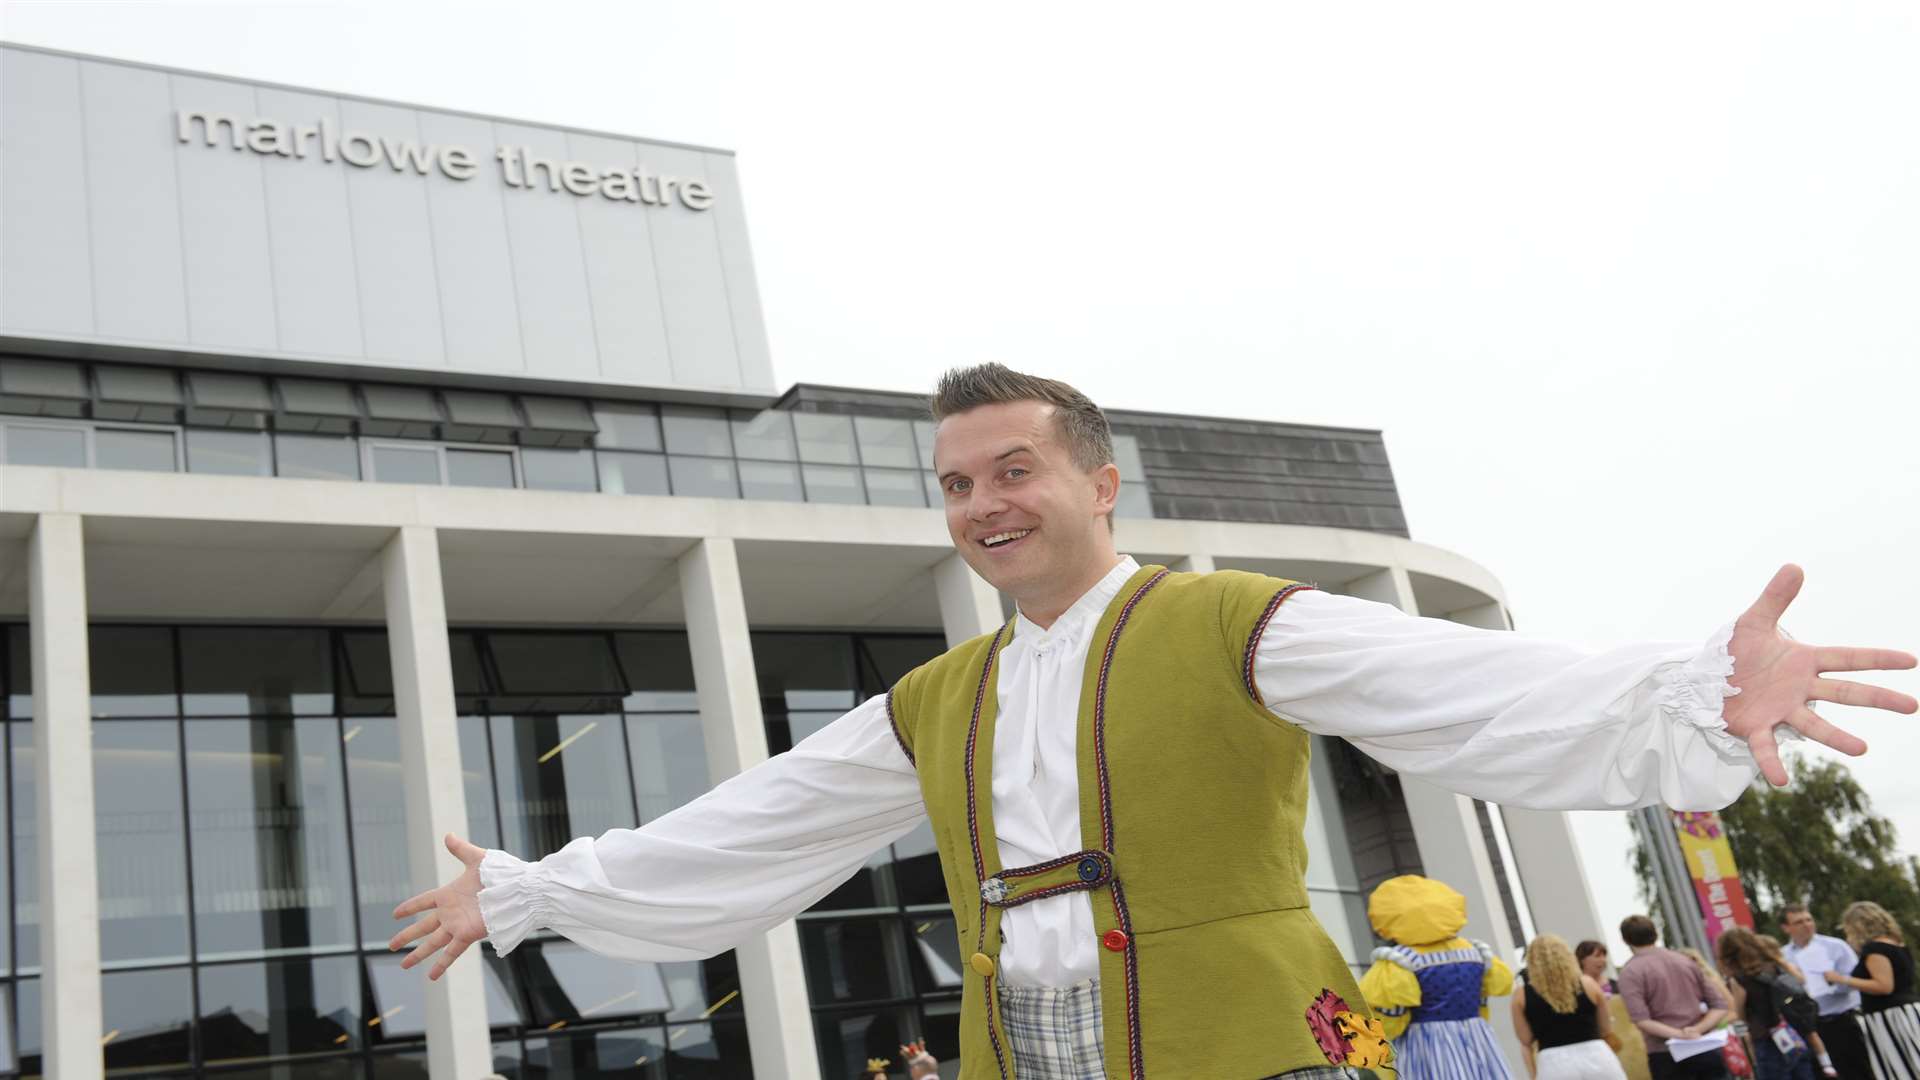 Mister Maker will be at the Marlowe Theatre